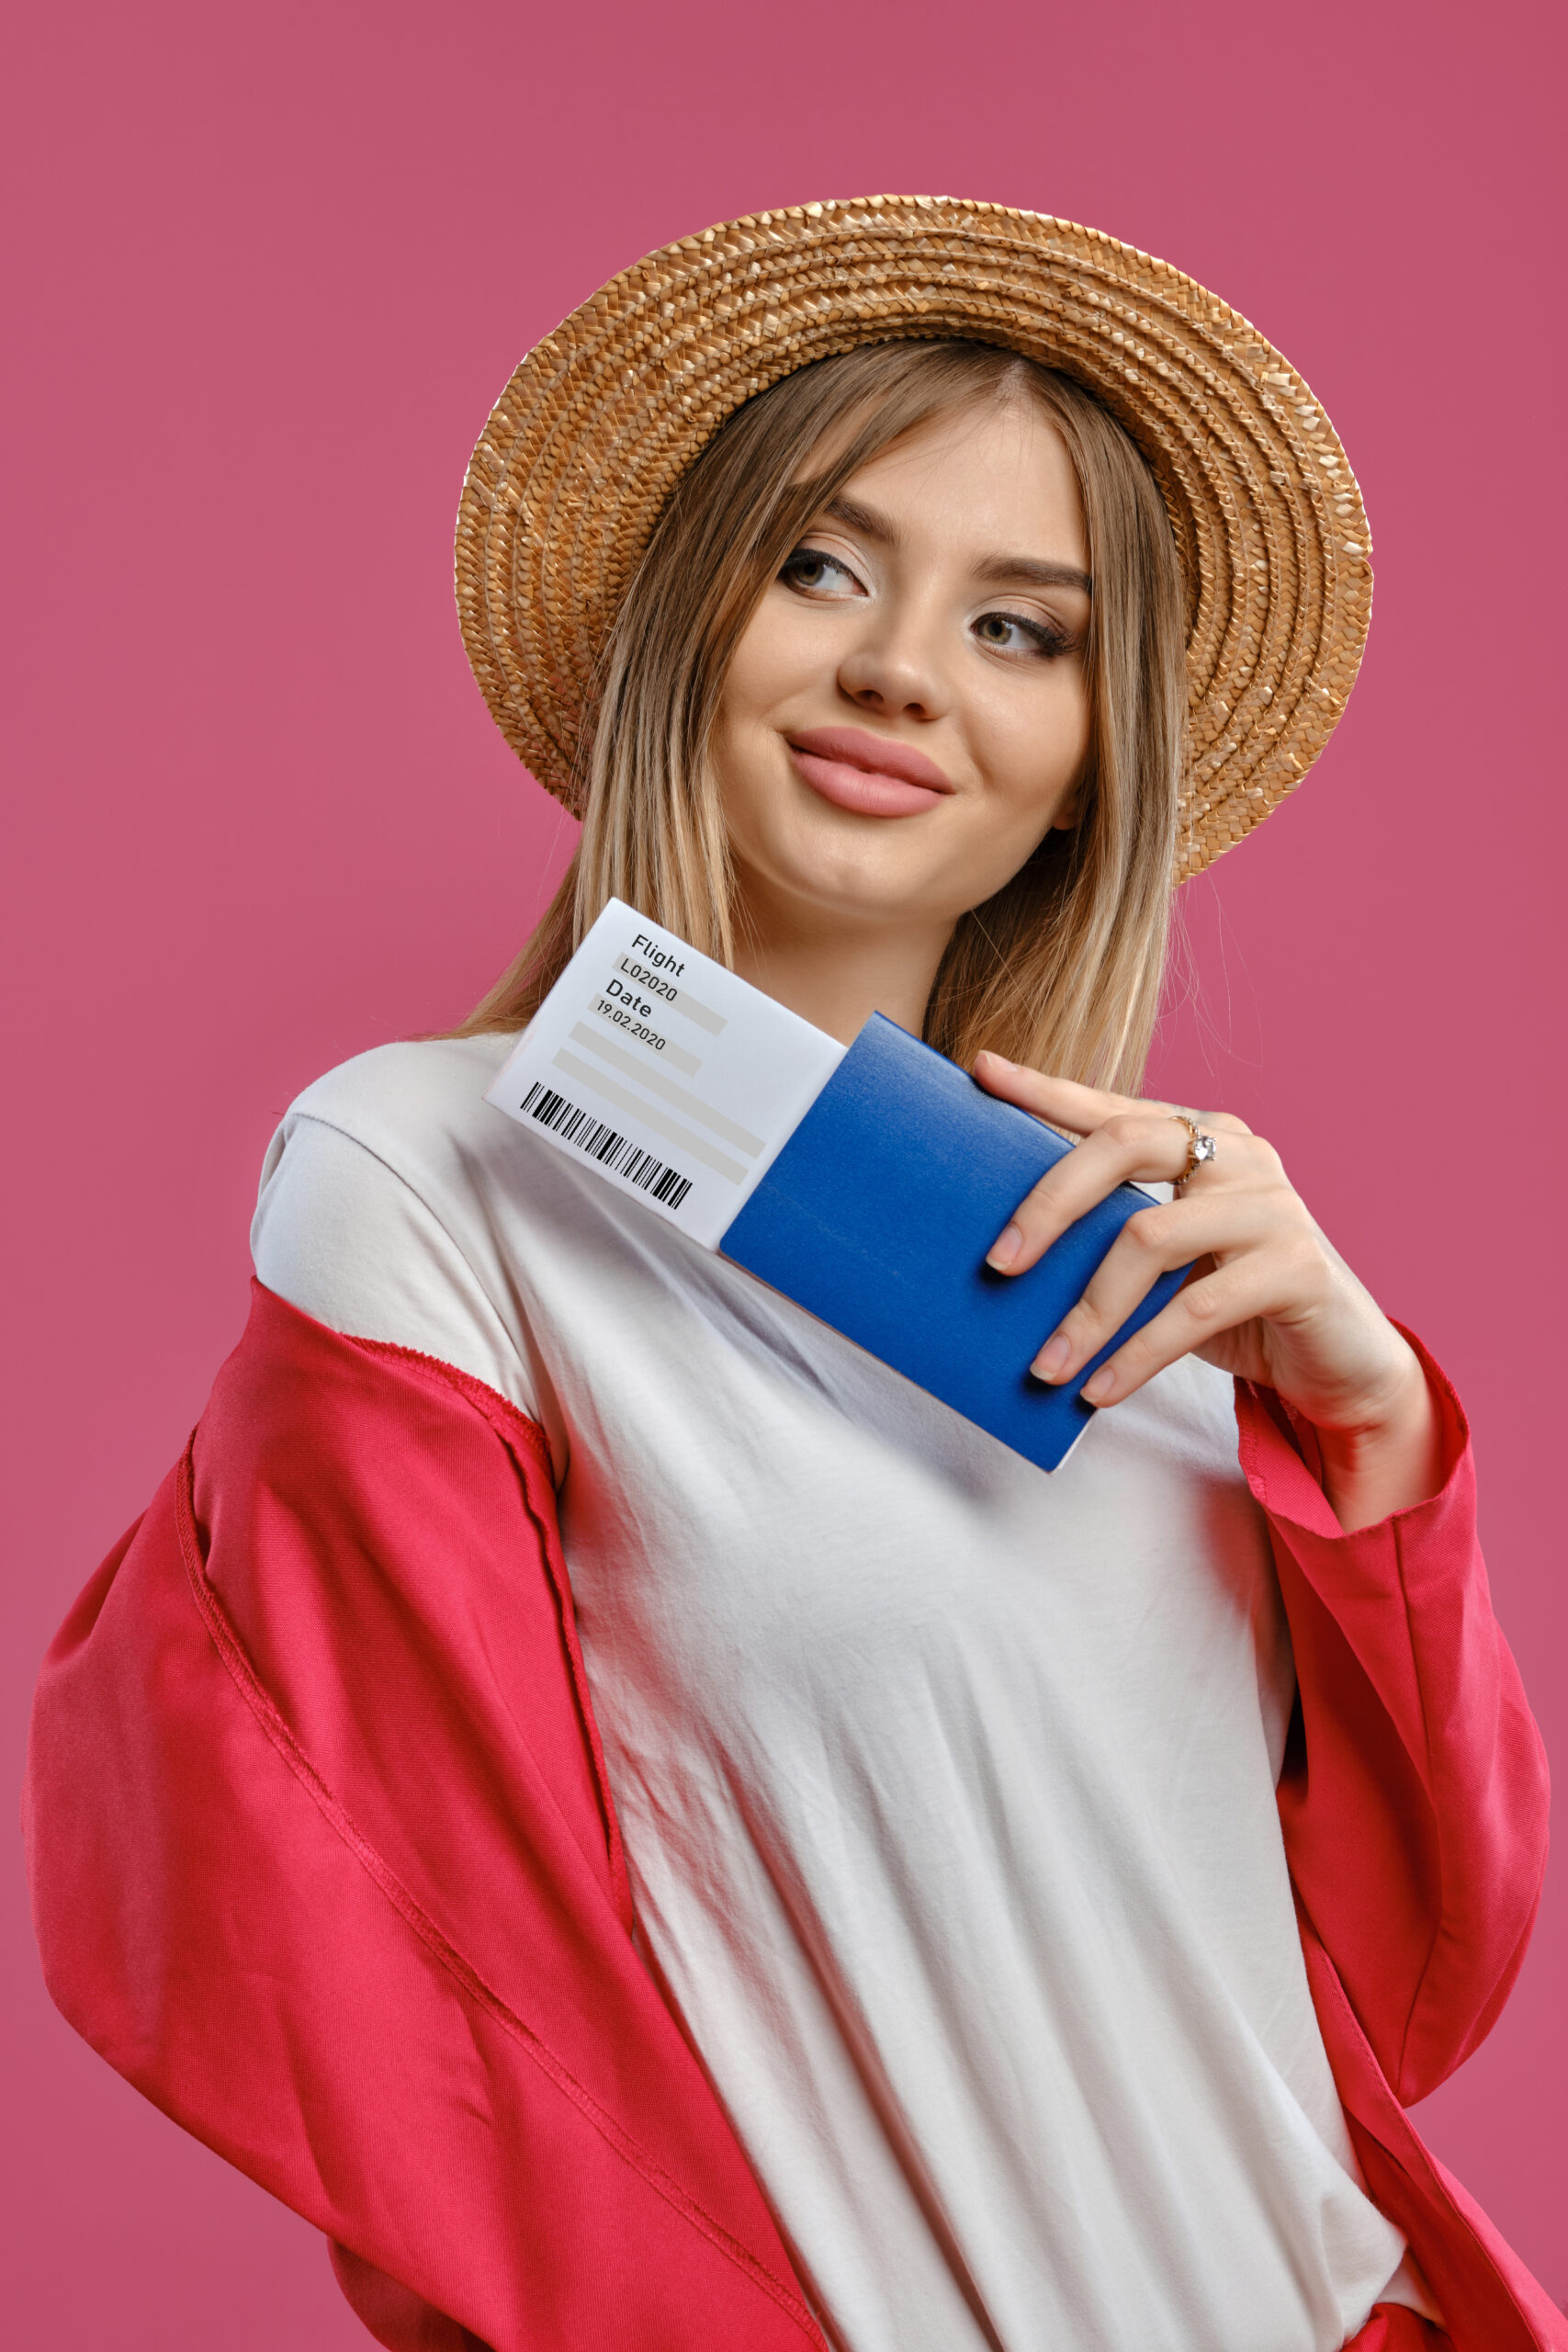 Gorgeous blonde woman in straw hat, white blouse and red pantsuit. She is smiling, holding passport and ticket while posing against pink studio background. Travelling concept. Close-up, copy space